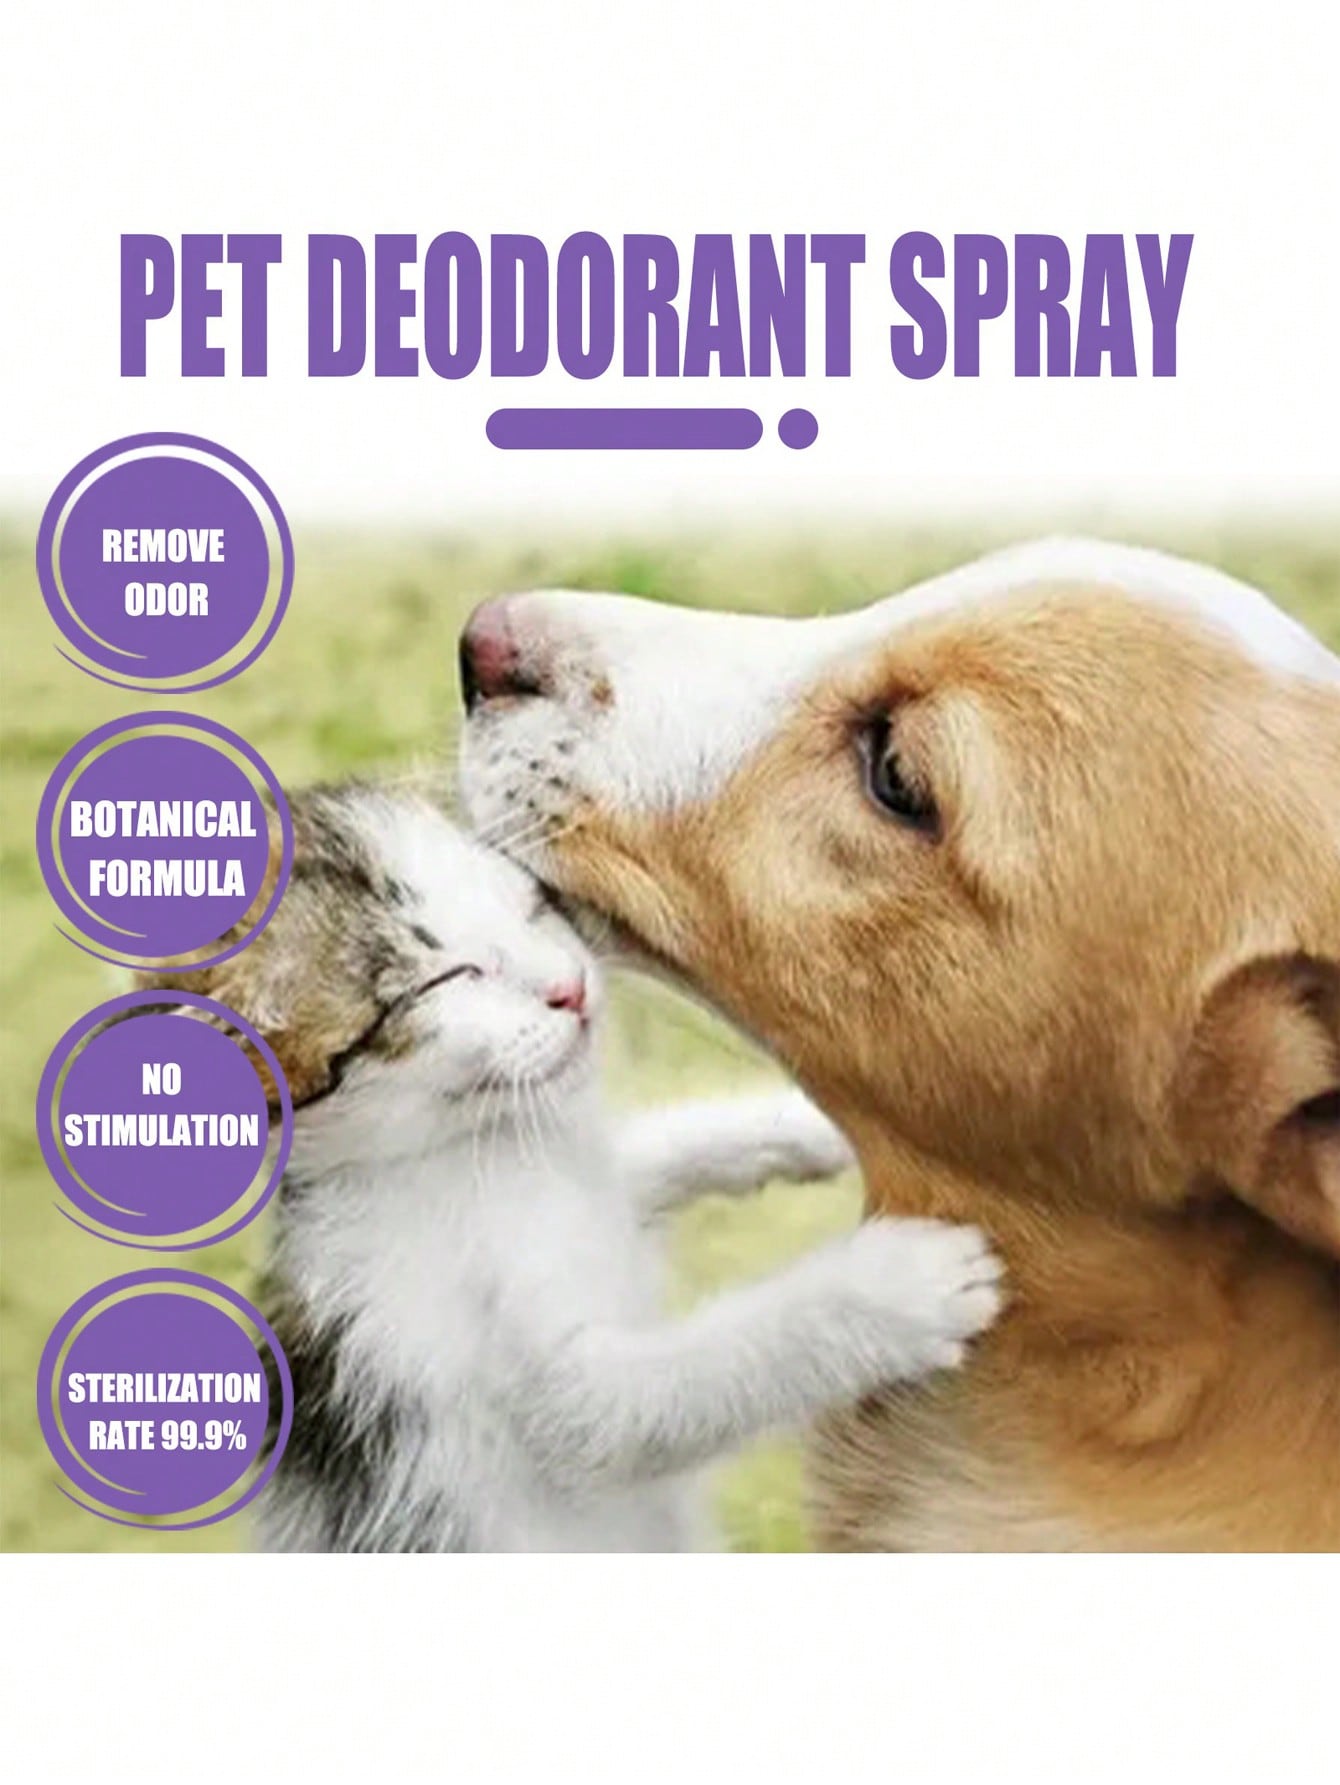 1pc Slogan Graphic Pet Deodorant For Cat Dog For Cleaning